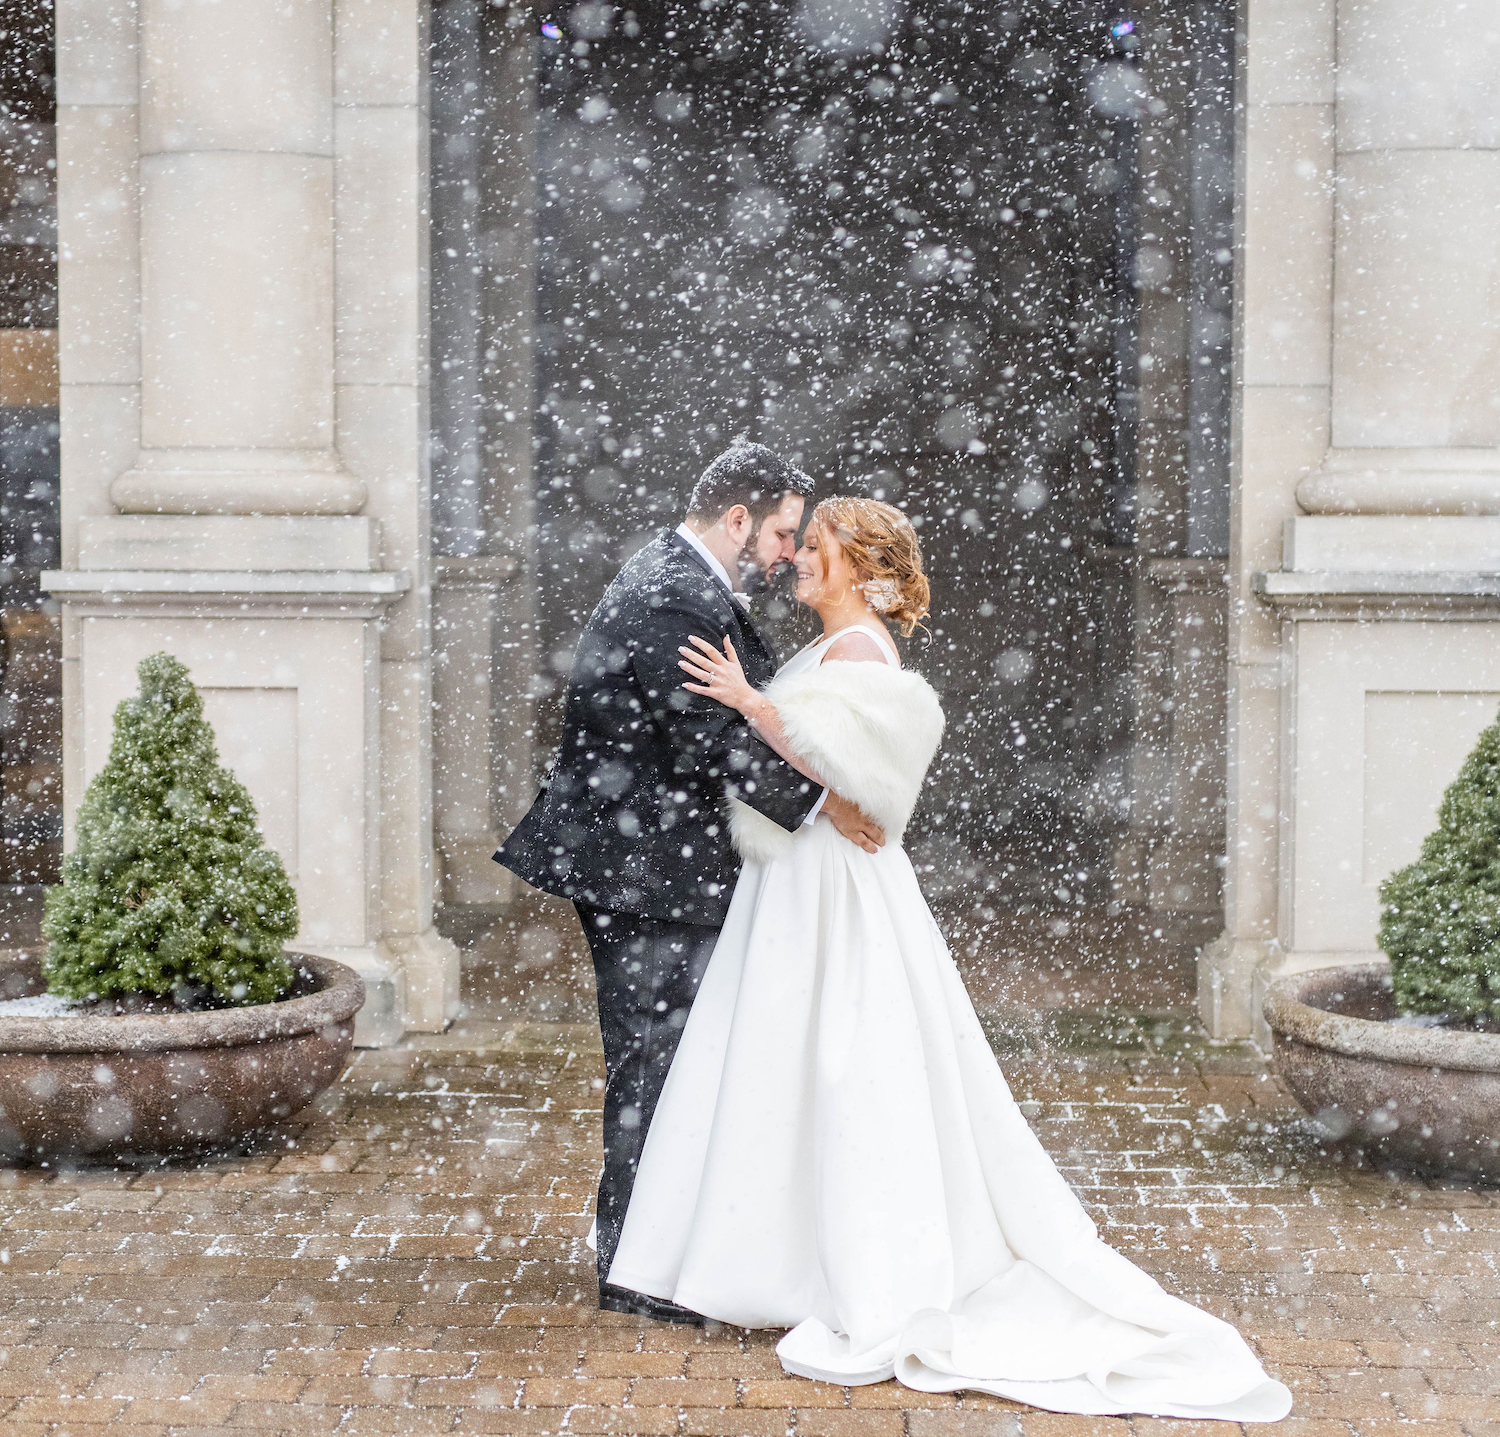 Small Bride and Groom in Snow